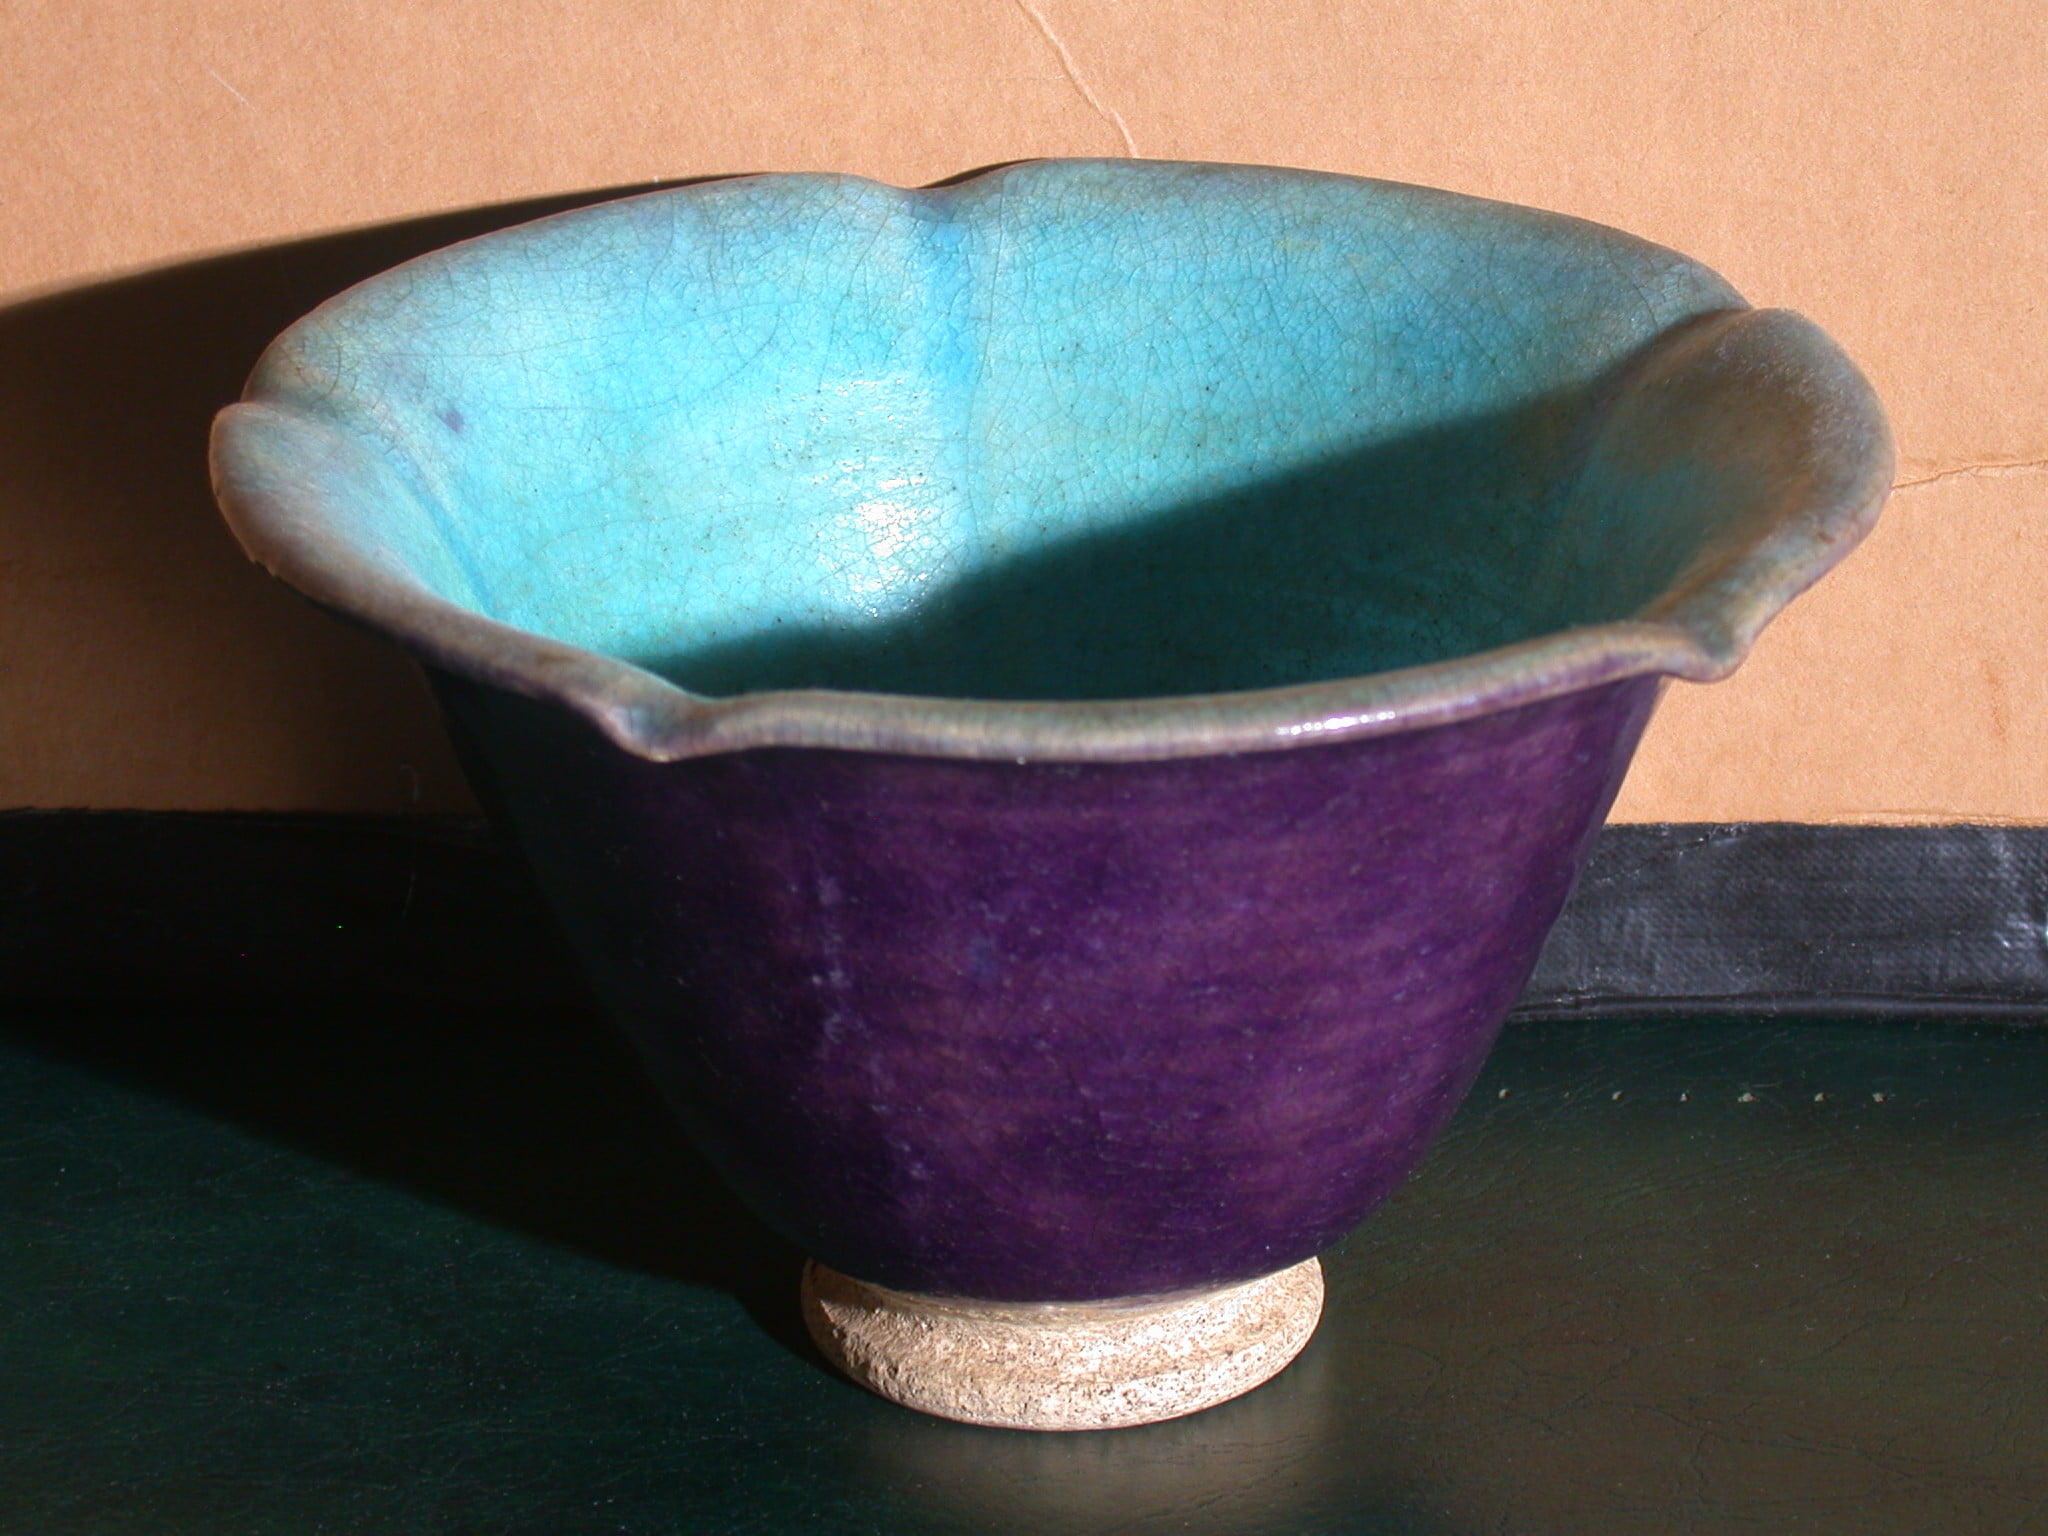 A bowl that flares out a little at the top with plum glaze exterior and a turquoise glaze interior with faince finish.